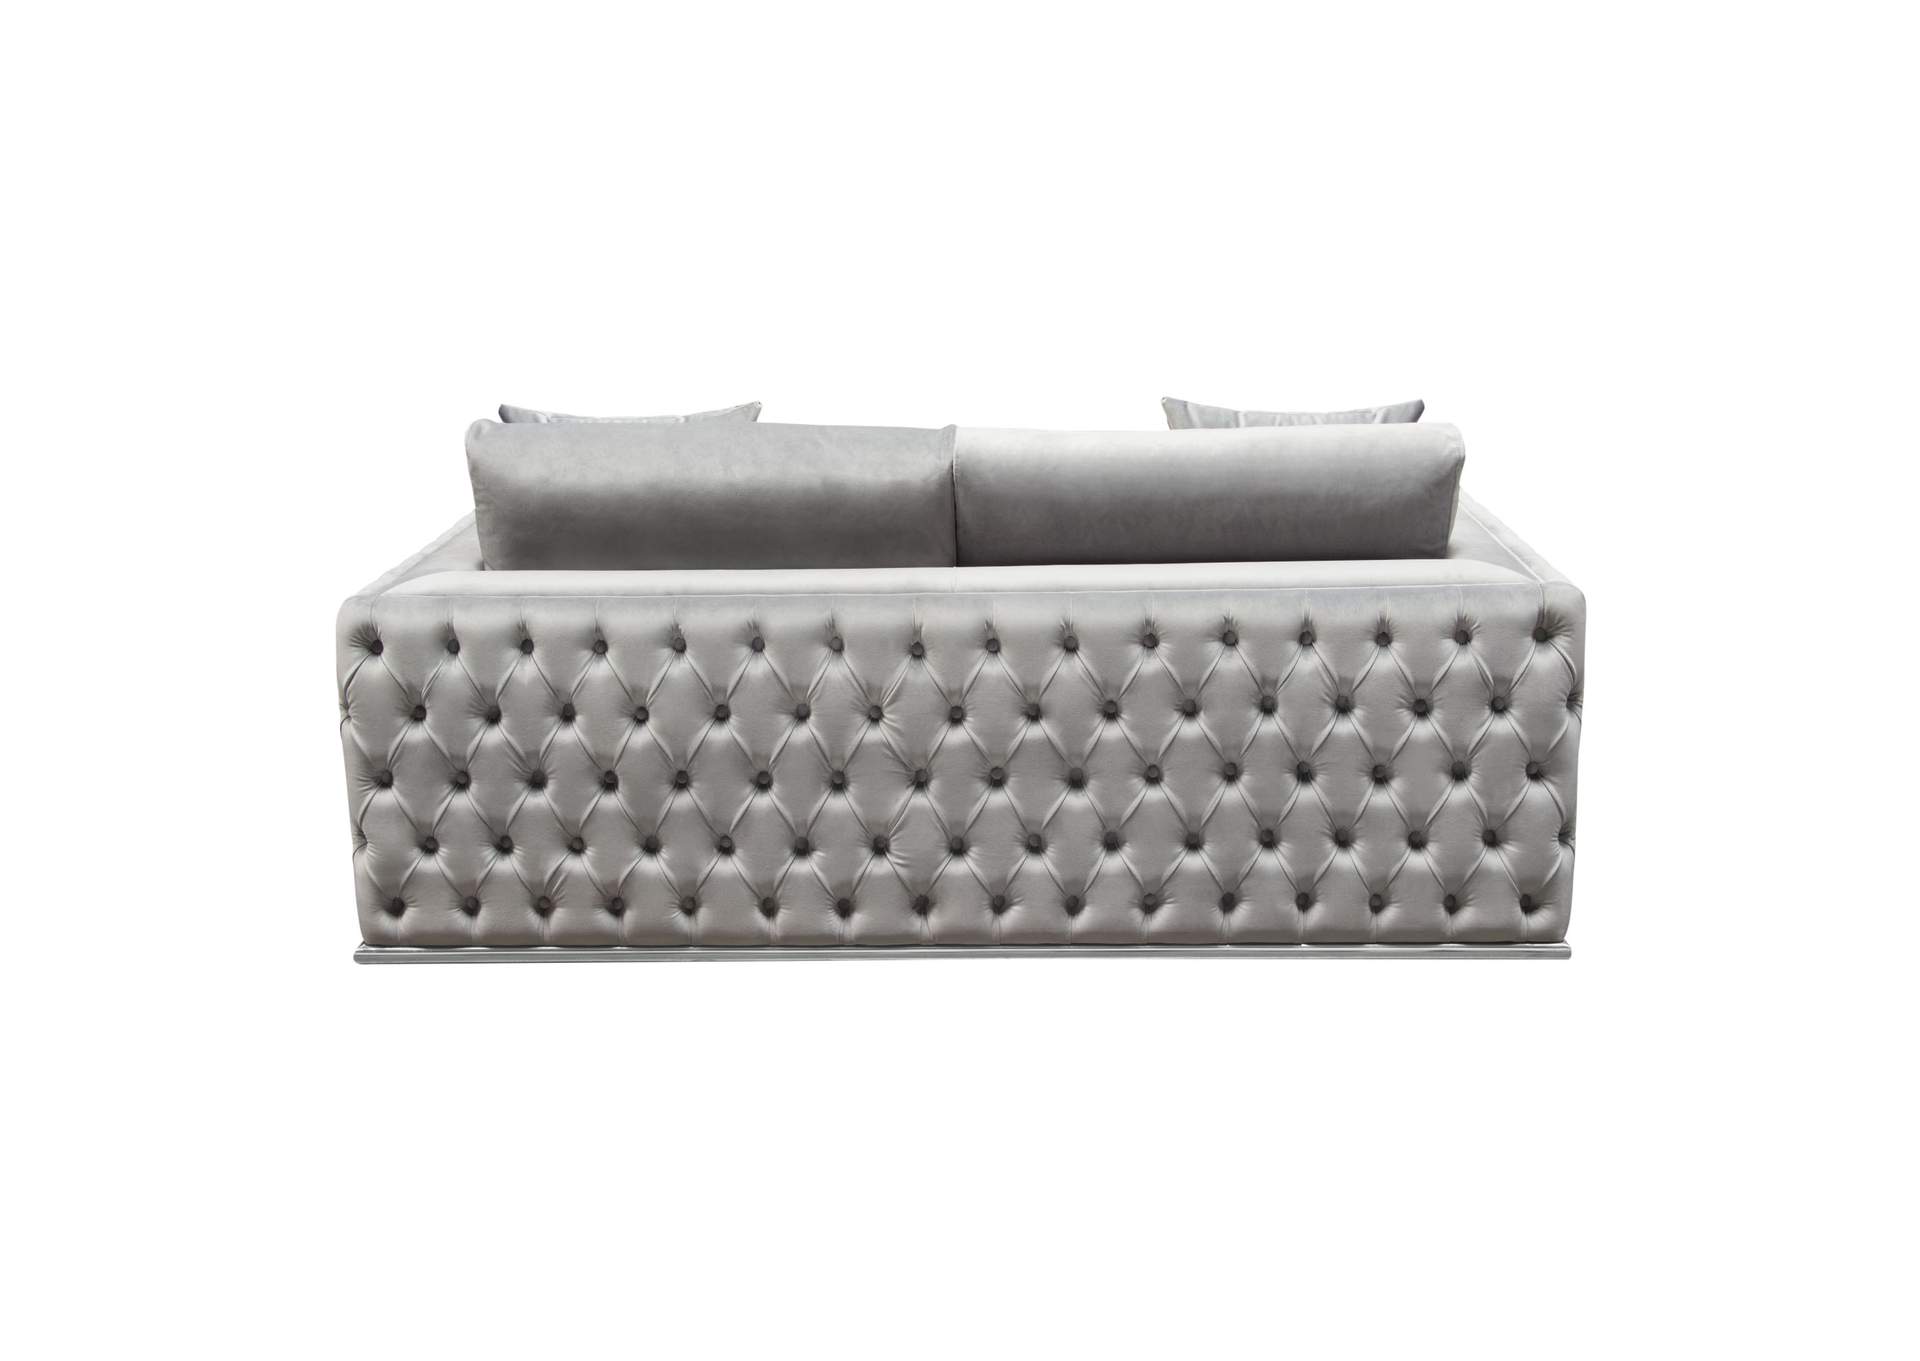 Envy Loveseat in Platinum Grey Velvet with Tufted Outside Detail and Silver Metal Trim by Diamond Sofa,Diamond Sofa